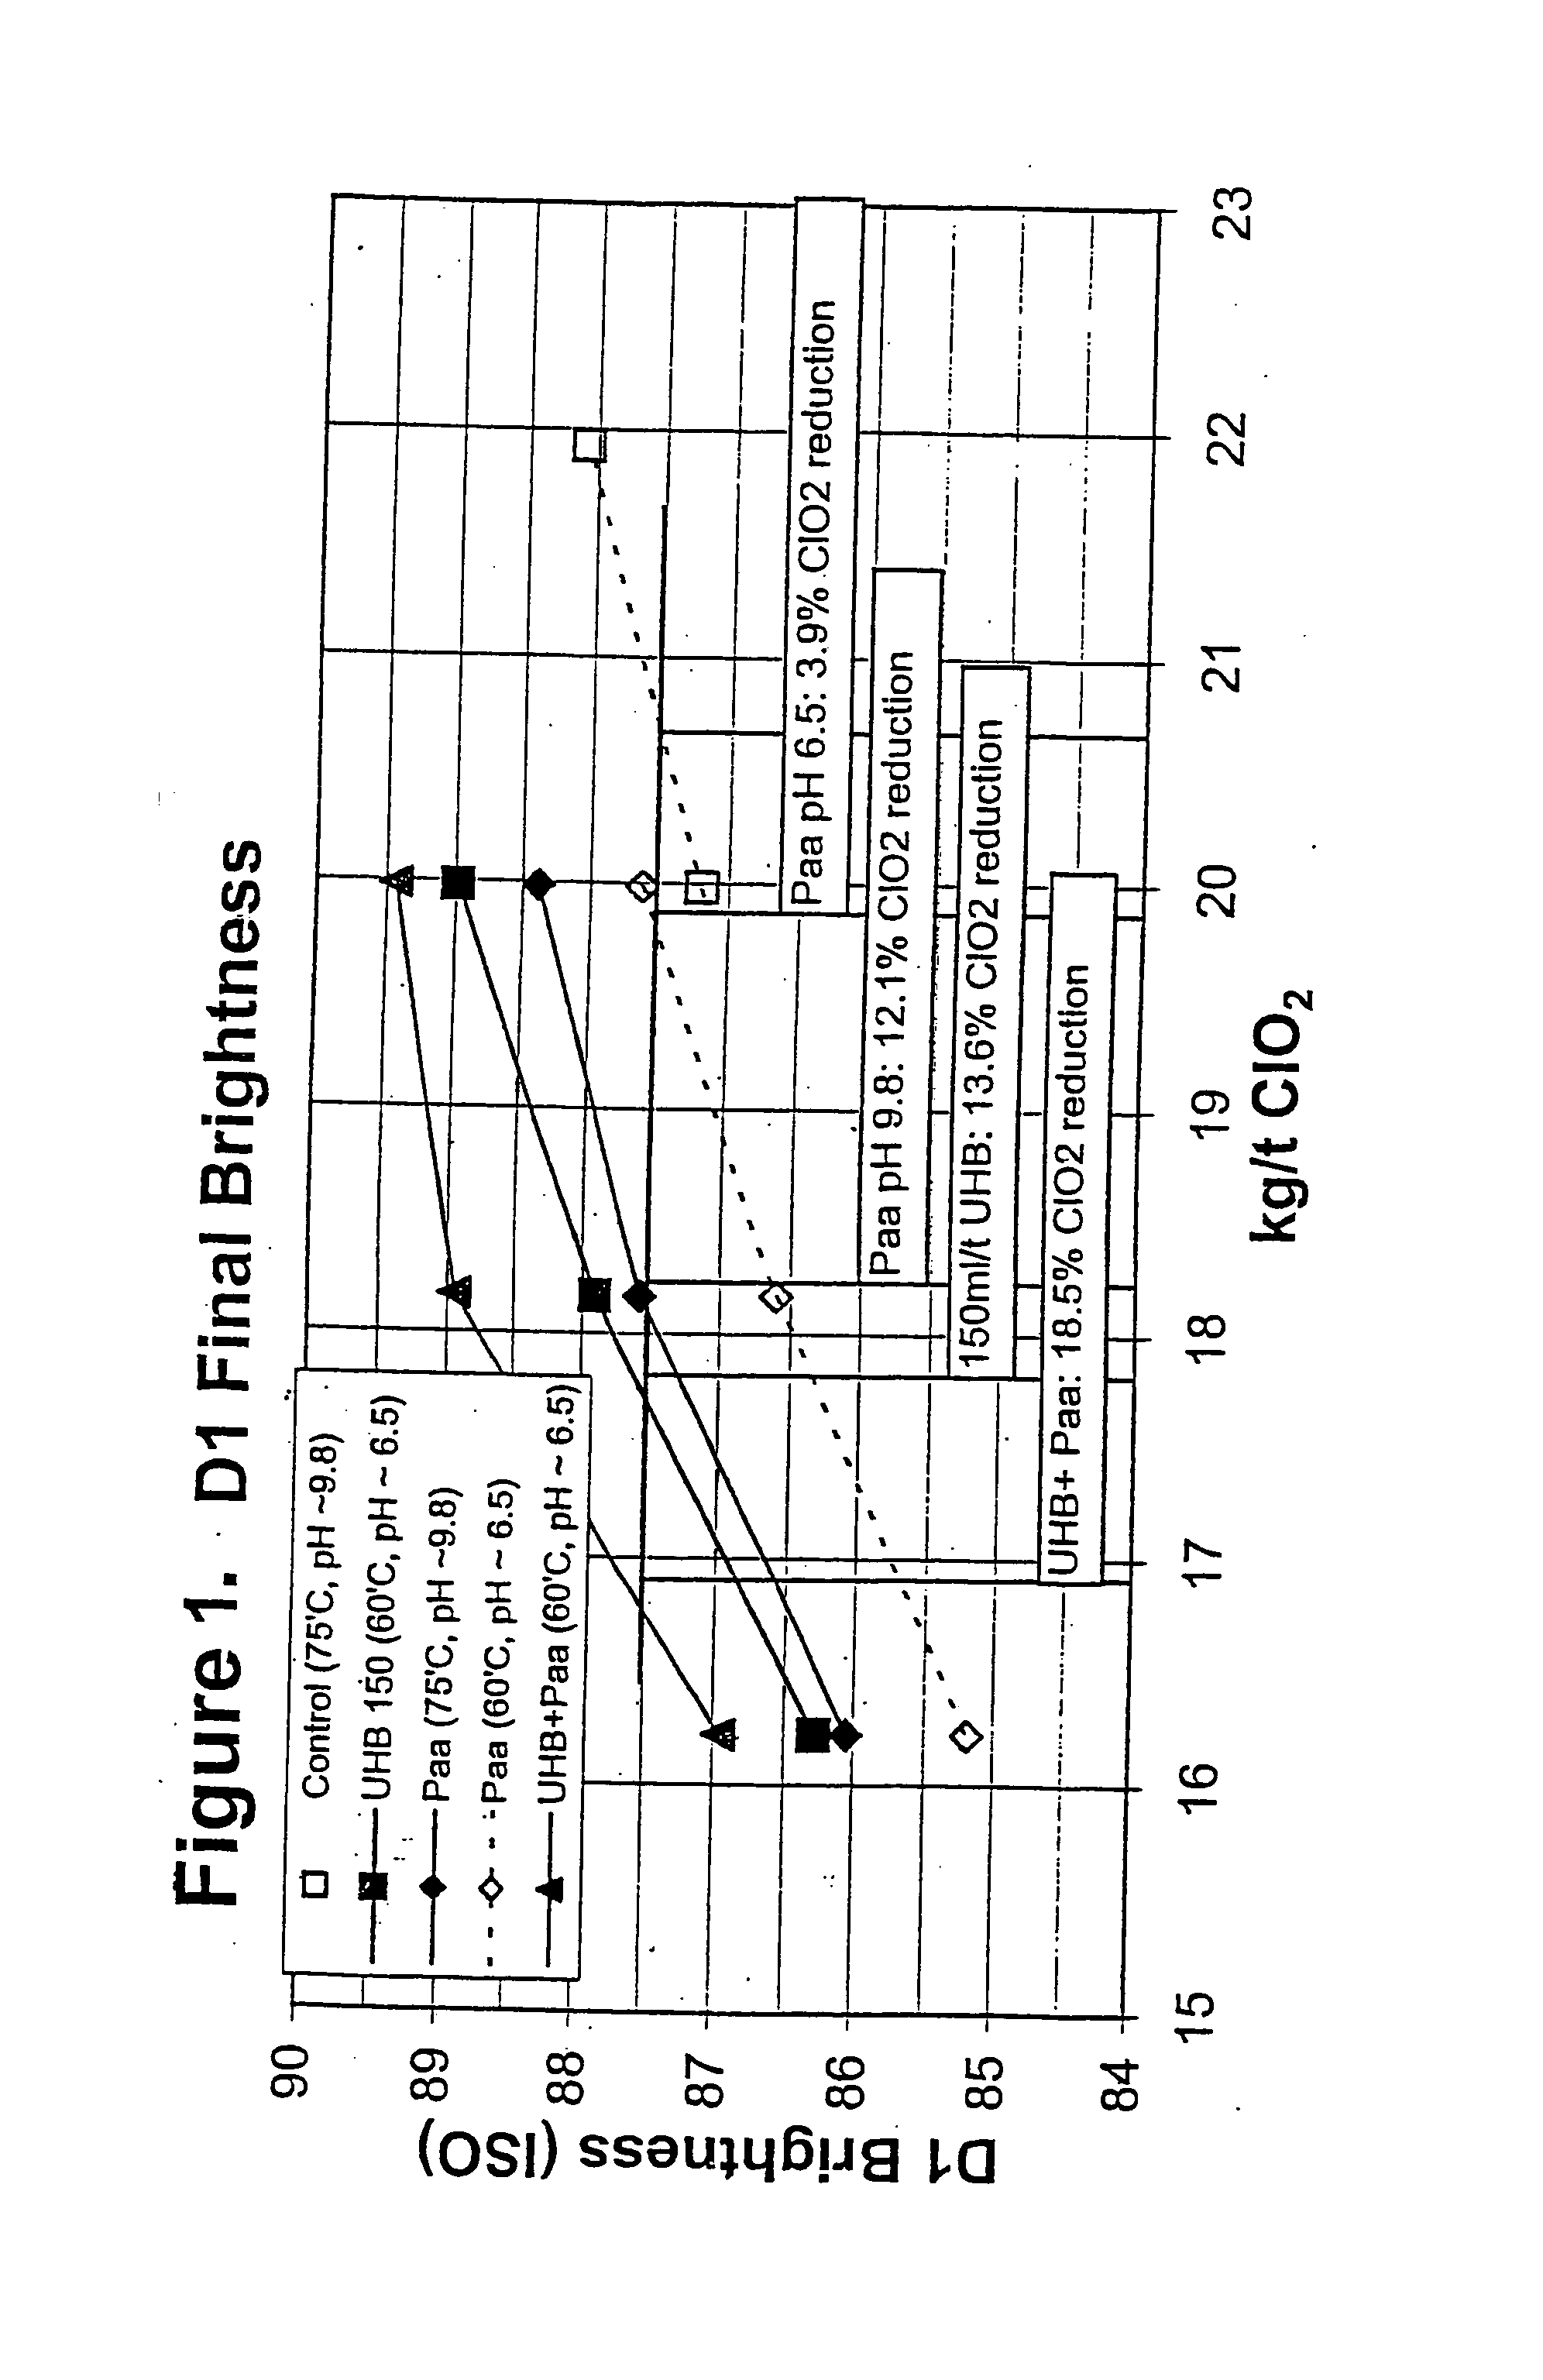 Bleaching stage using xylanase with hydrogen peroxide, peracids, or a combination thereof